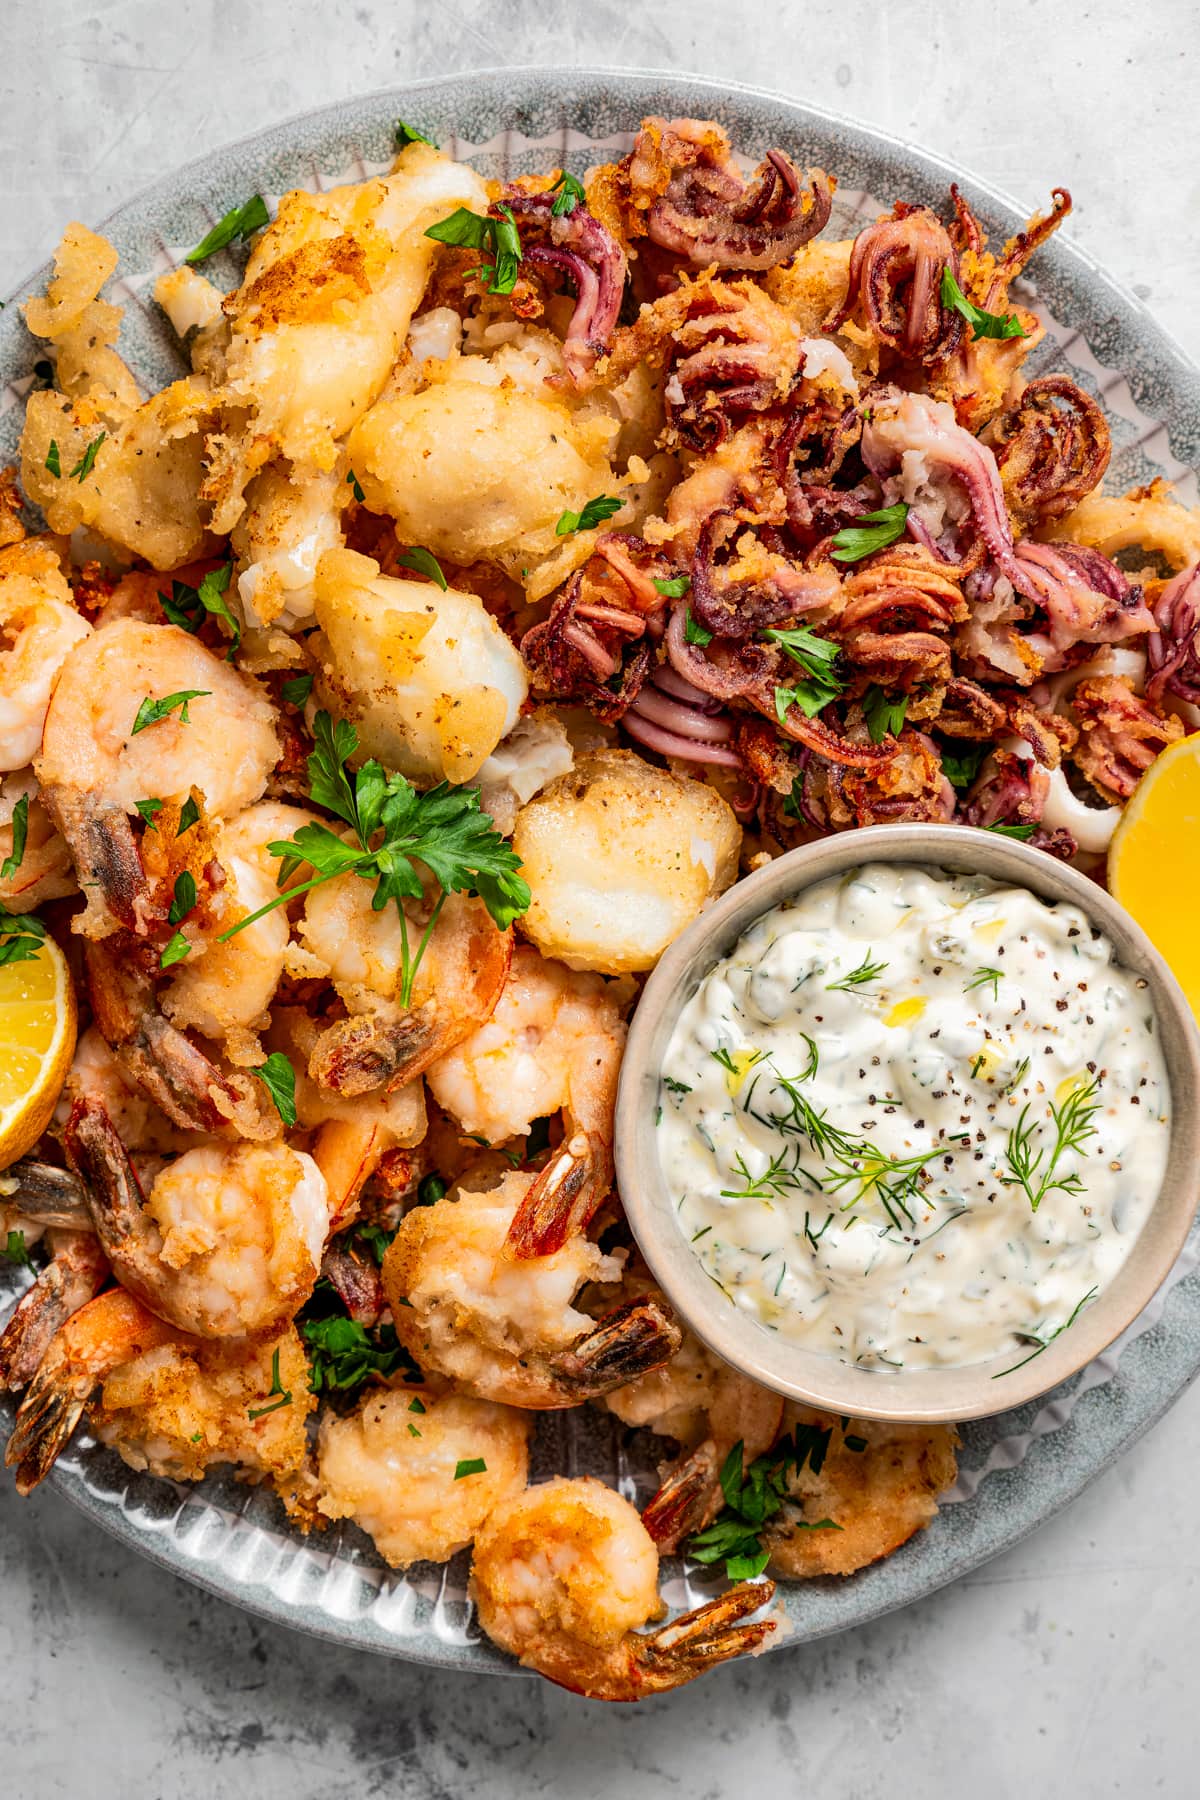 A round plate filled with battered and fried shrimp, cod, and calamari, with a tartar sauce served in a bowl.